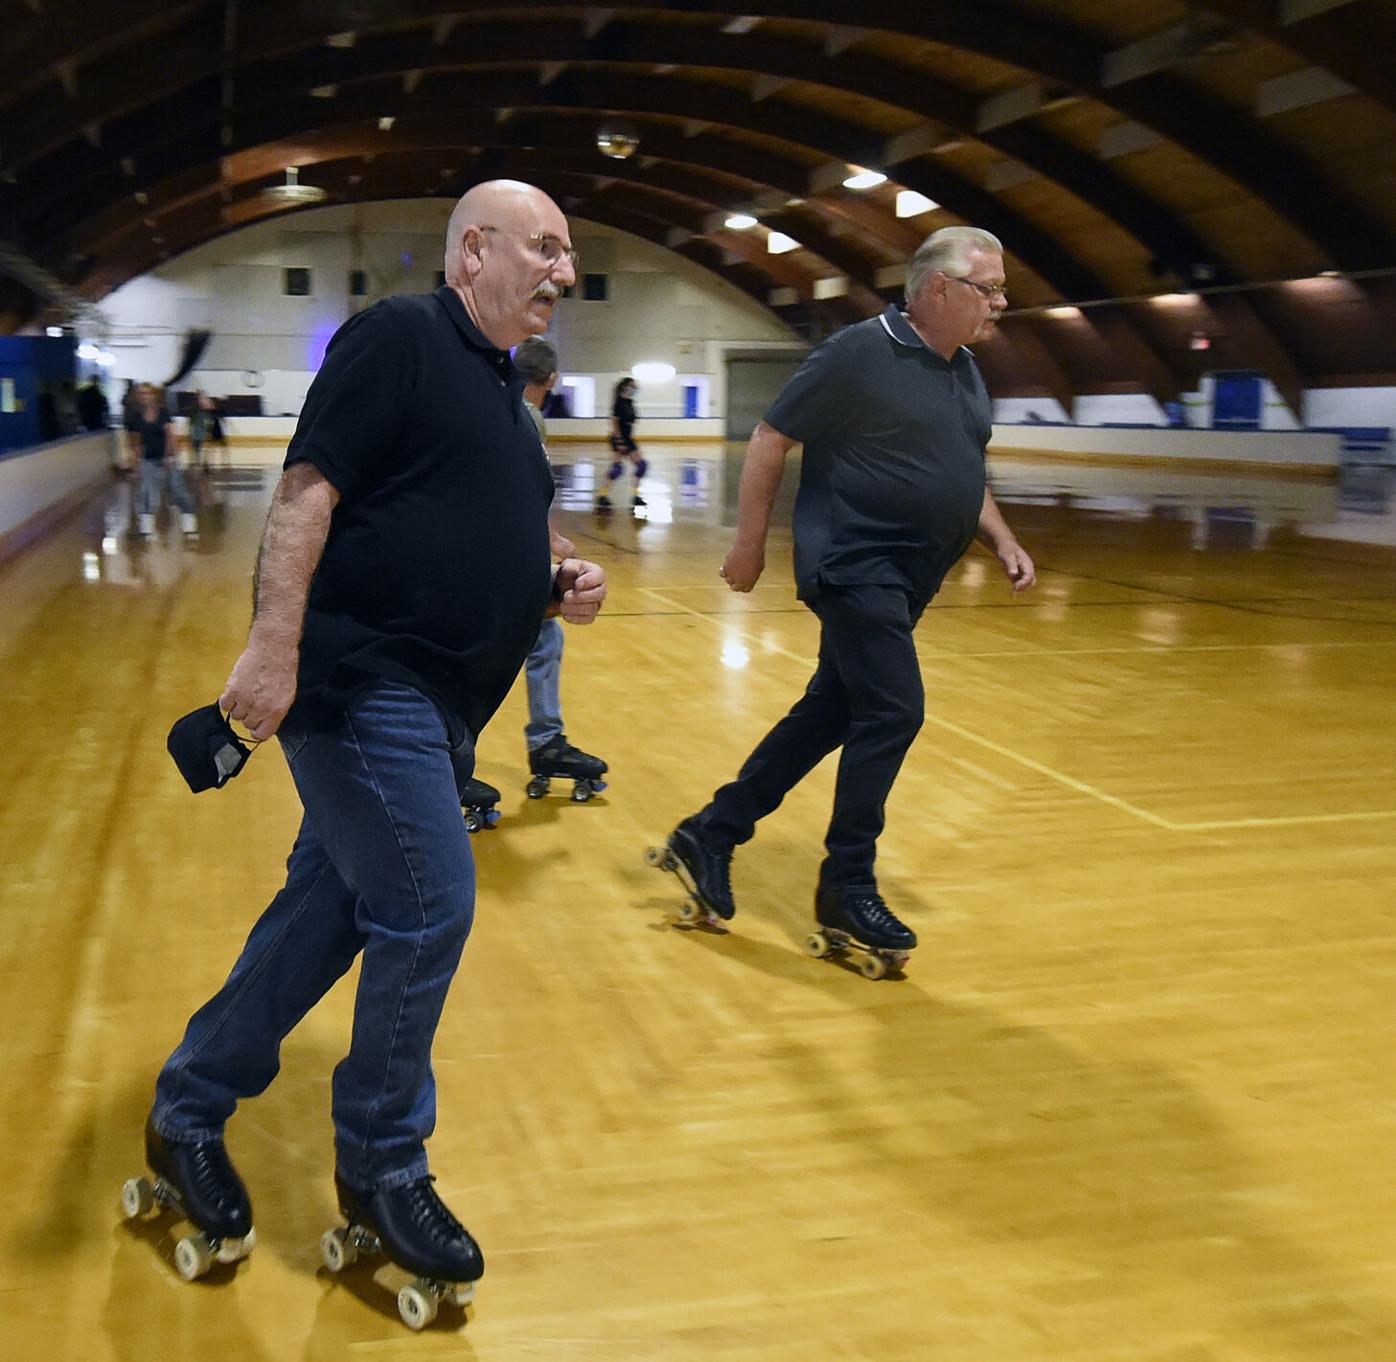 Ranking regional roller rinks, from Overlook to the Castle and